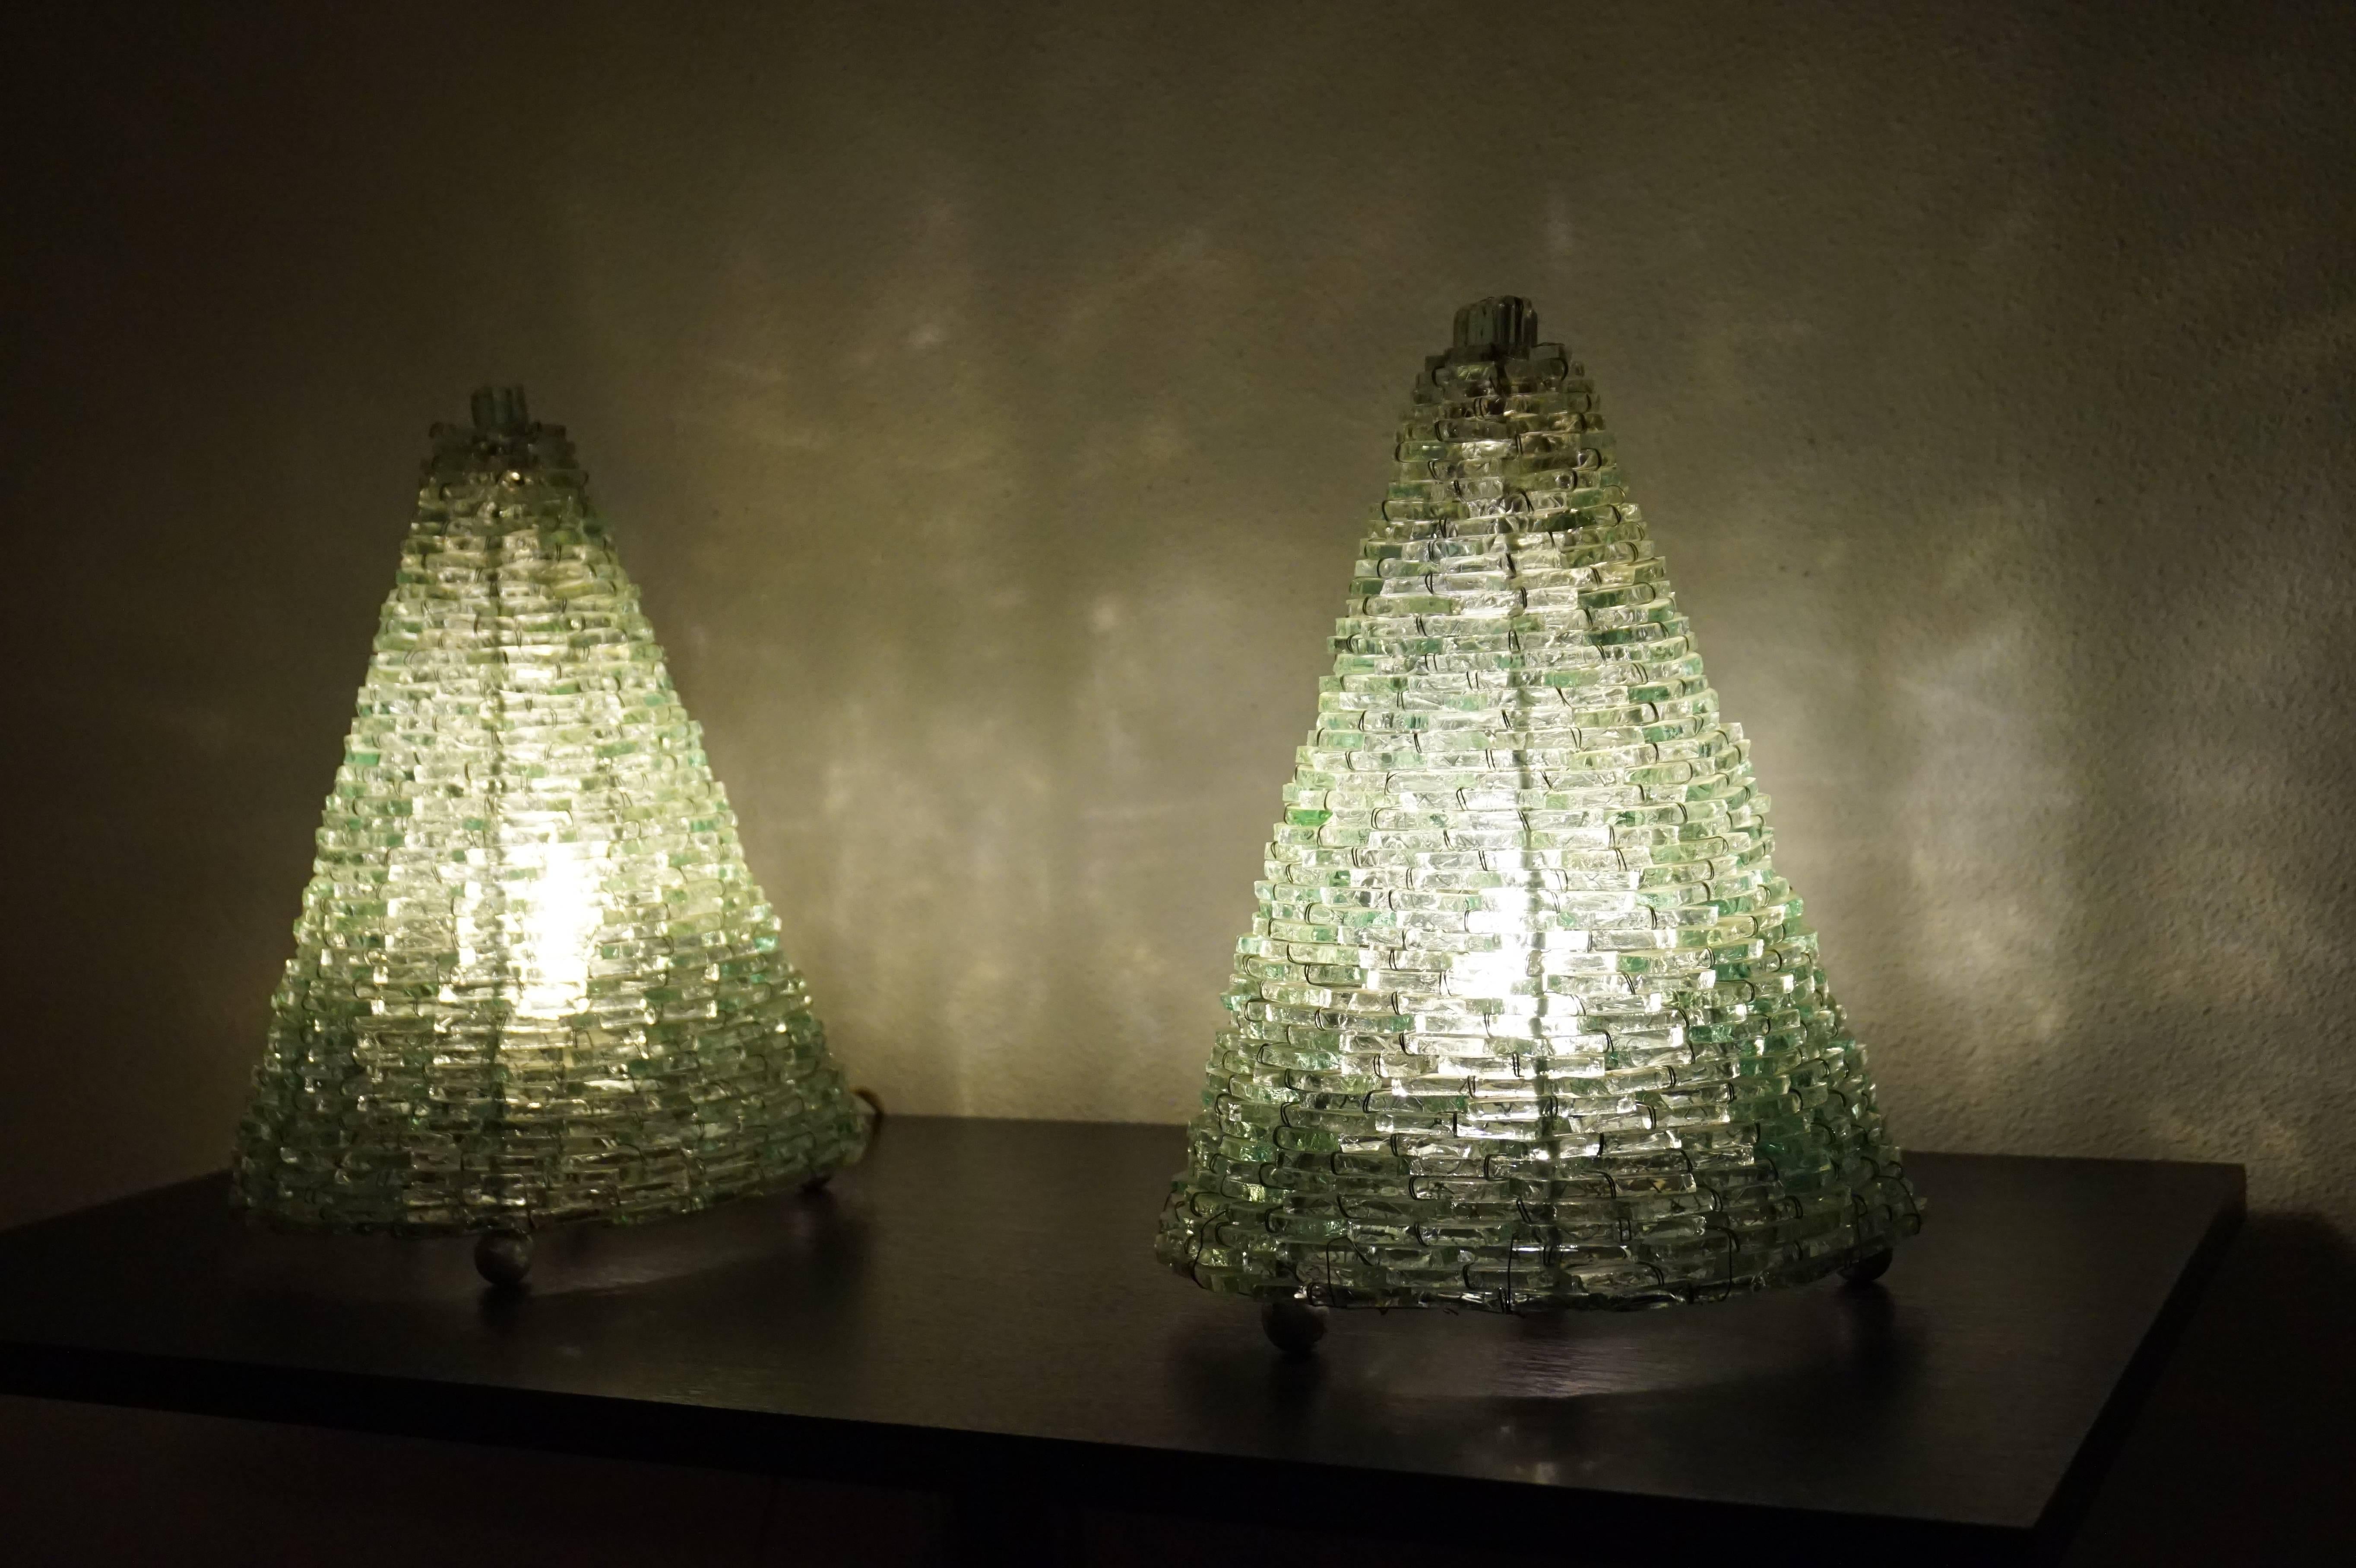 A rare pair of handmade table lamps.

These handmade table lamps of stacked glass are beautiful both on and of. The shape is timeless and in the evening they radiate a warm, spherical light. The glass pieces almost look like stacked pieces of ice.